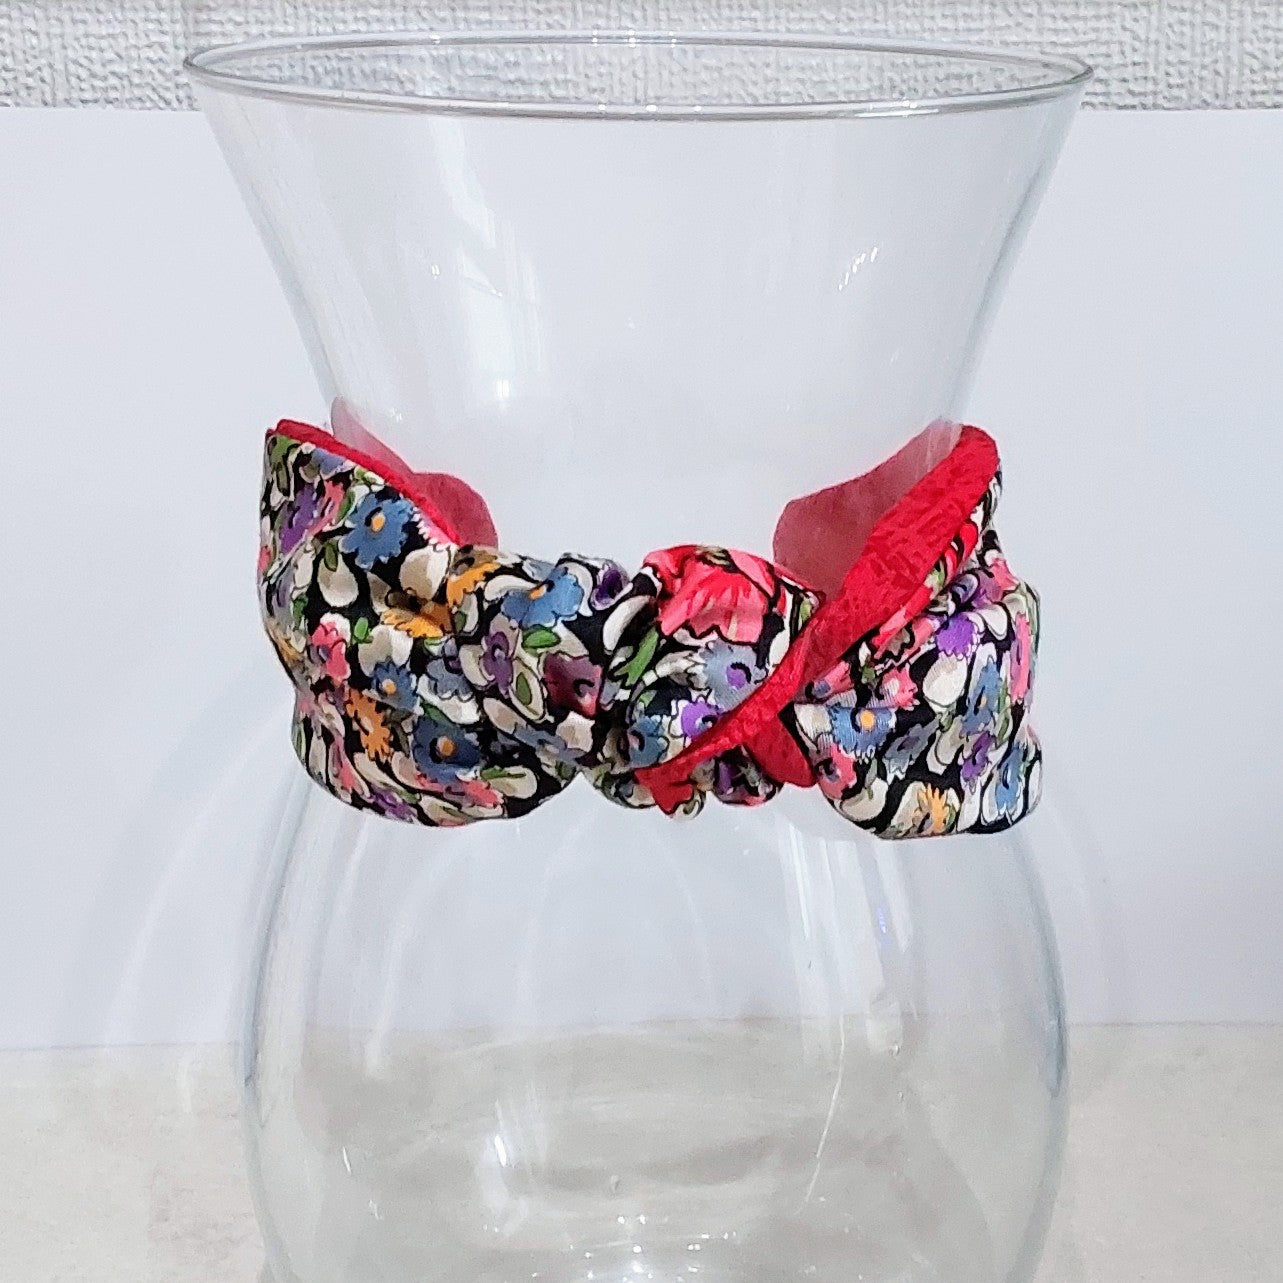 Hairband Spring Flower Ditsy Floral Cotton Fabric Bespoke Top Knot Headband